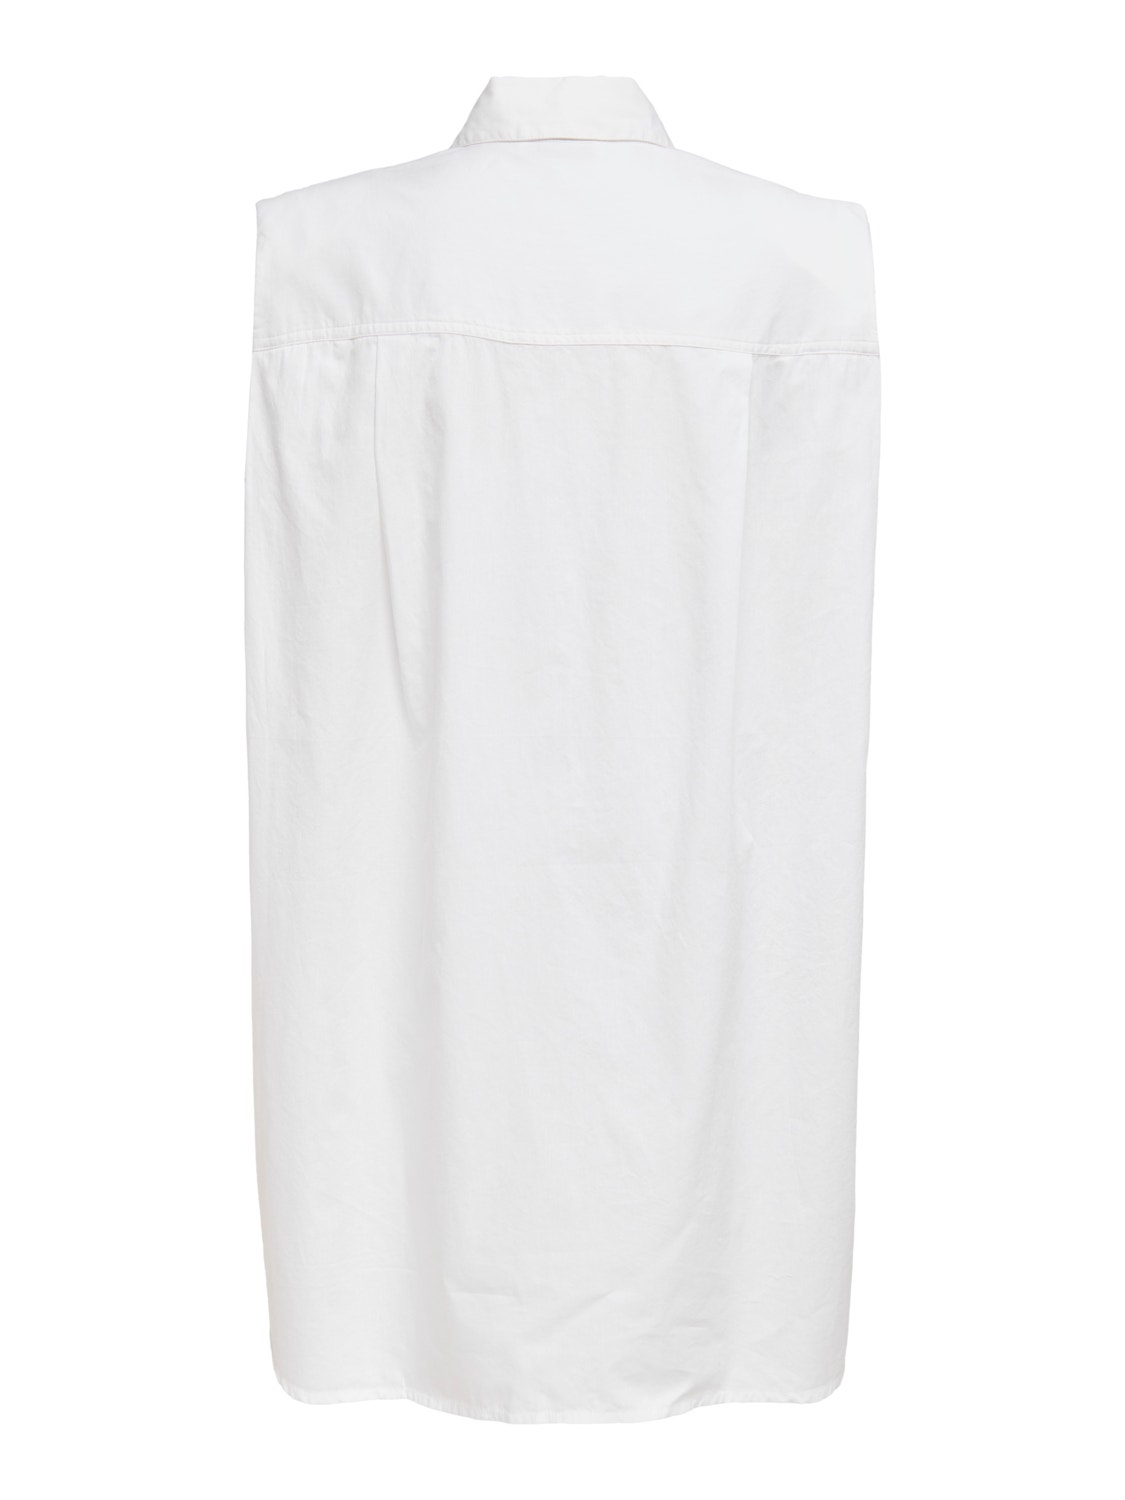 ONLY Sans manches Chemise -White - 15233714